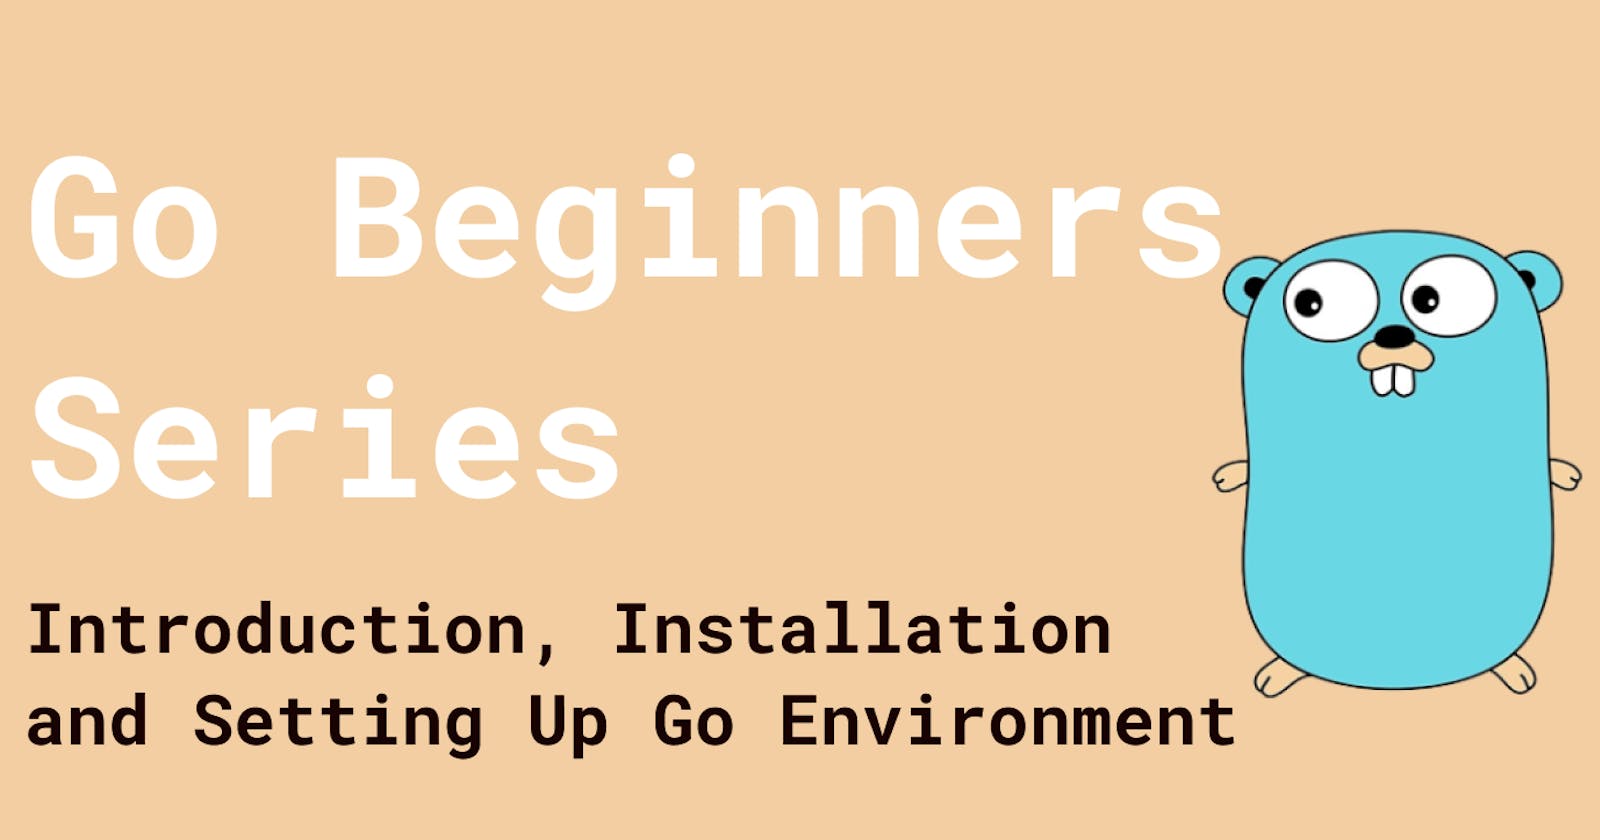 Go Beginners Series: Introduction, Installation, and Setting Up Go Environment